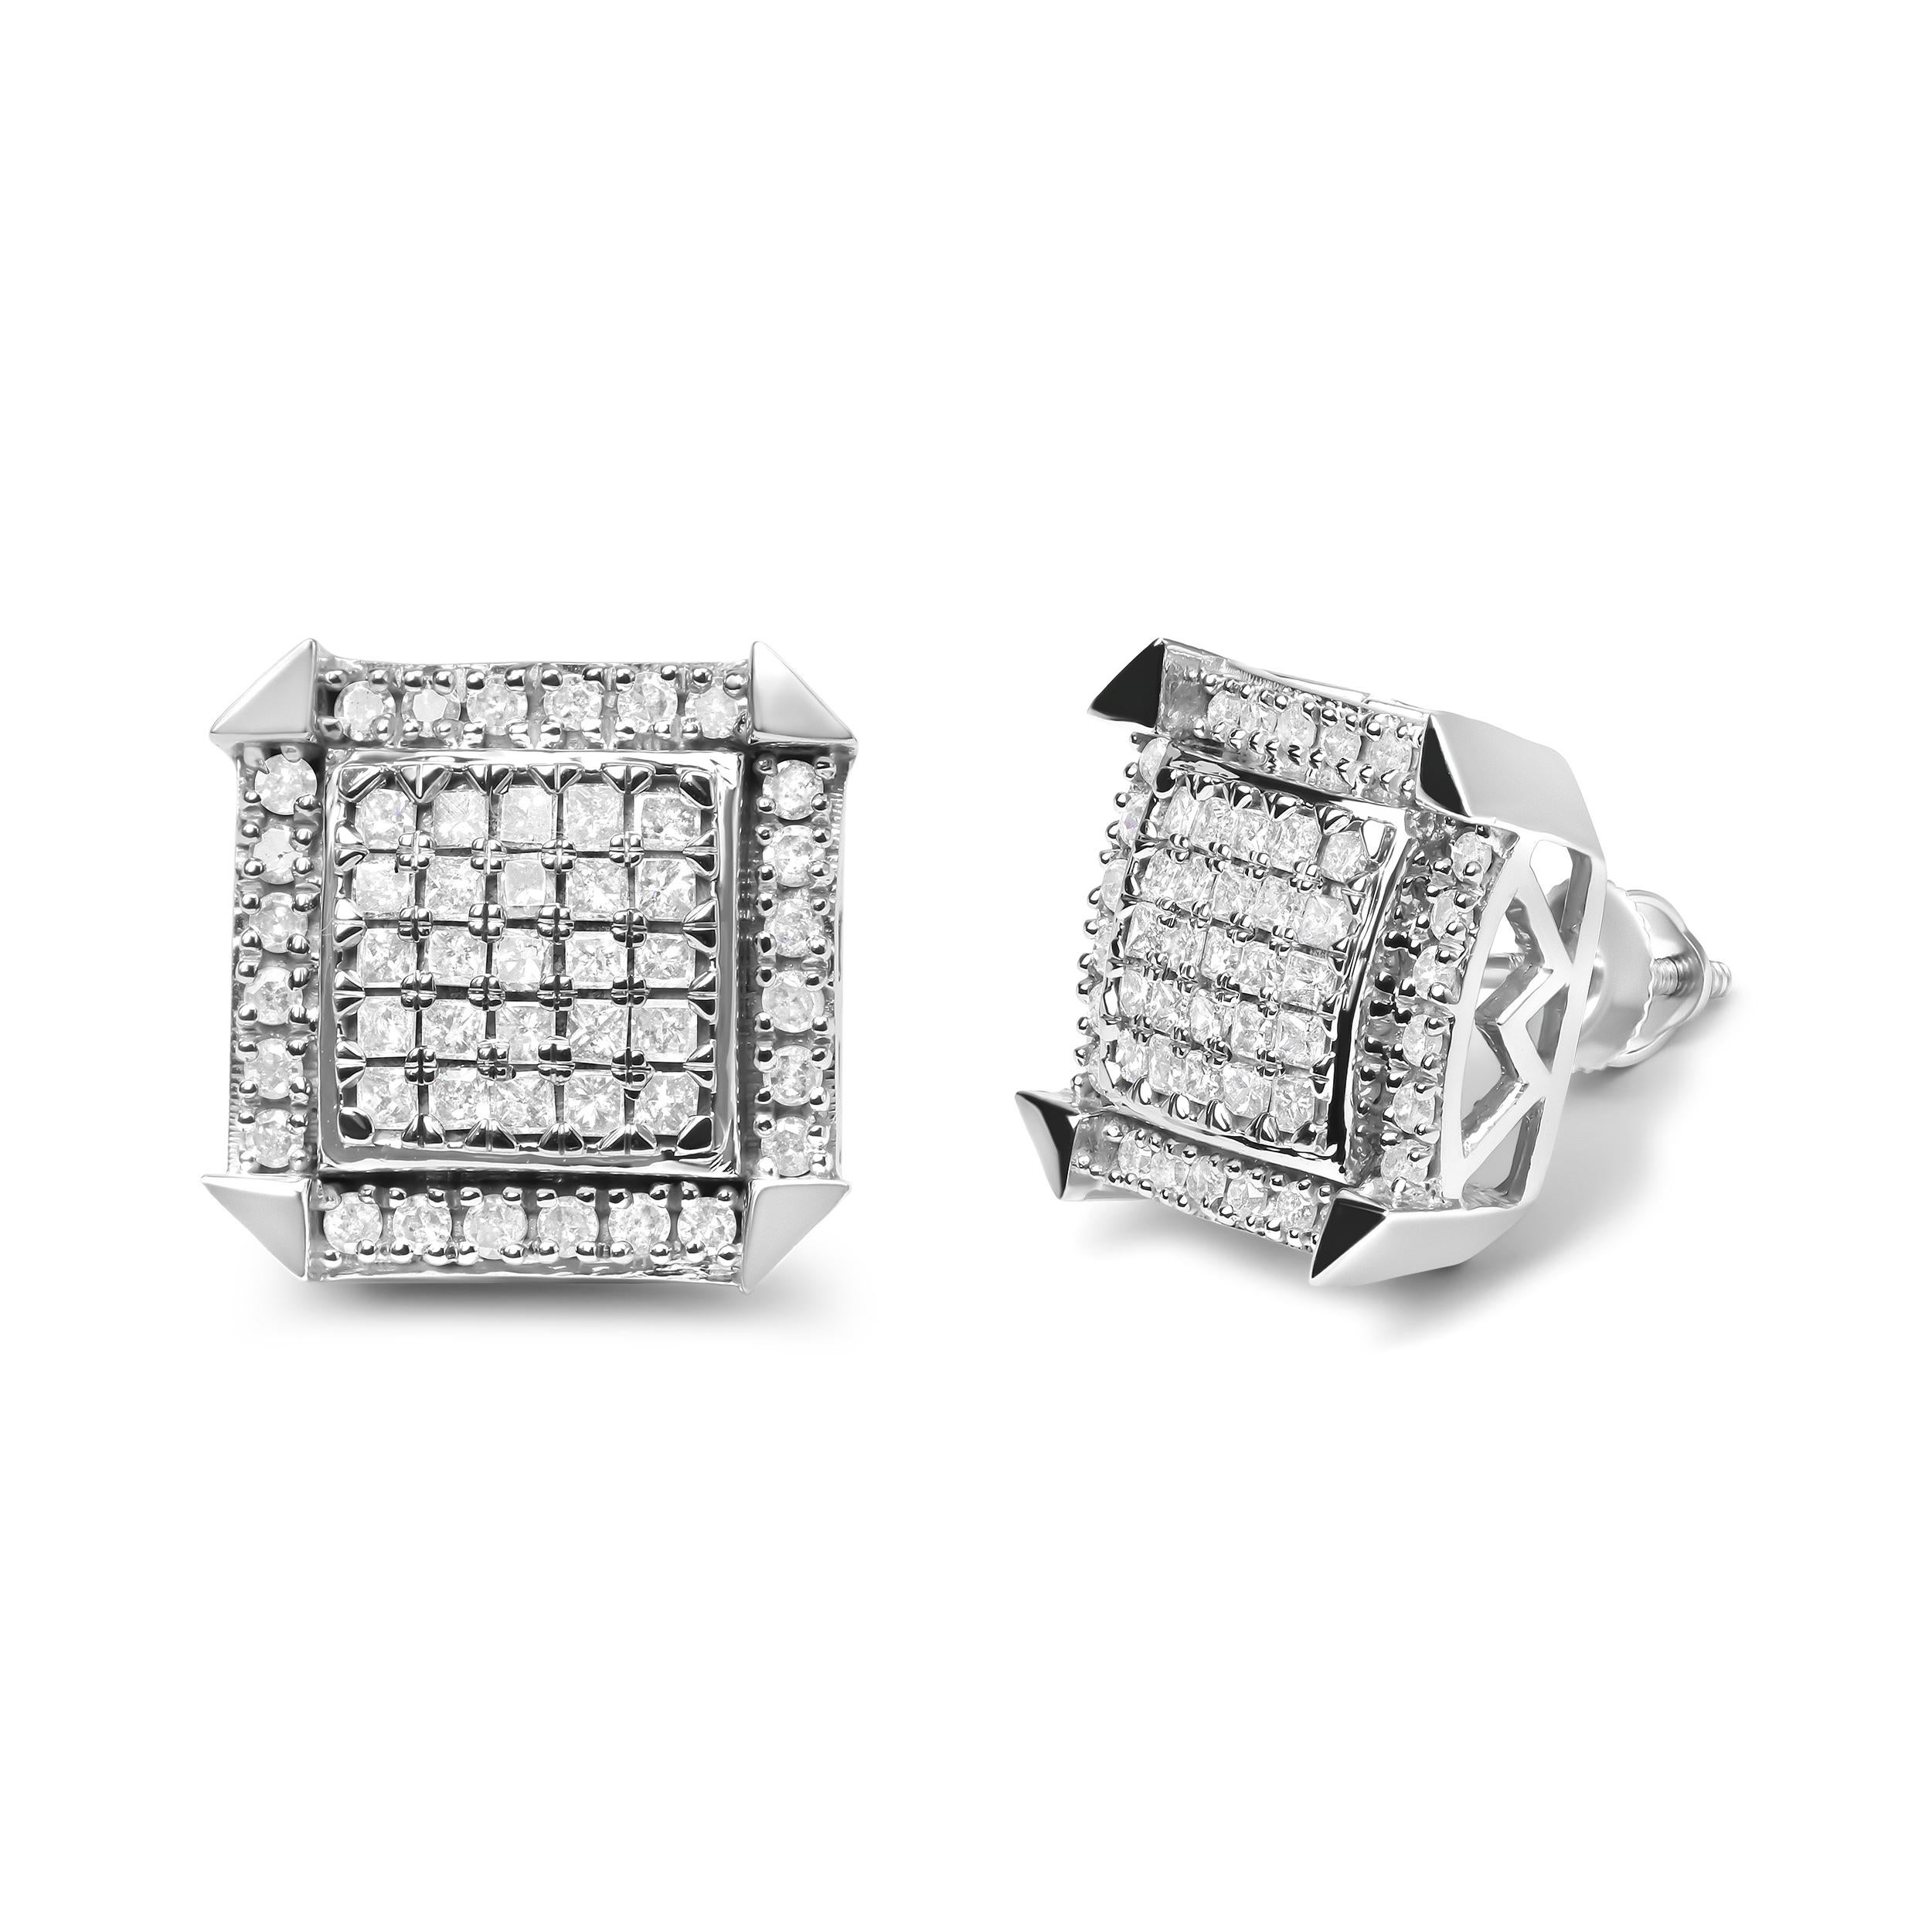 Indulge in the timeless elegance of these 10K white gold stud earrings, boasting a captivating composite design with a halo of sparkling diamonds. The intricate craftsmanship is unparalleled, with 98 natural diamonds set in both invisible and prong